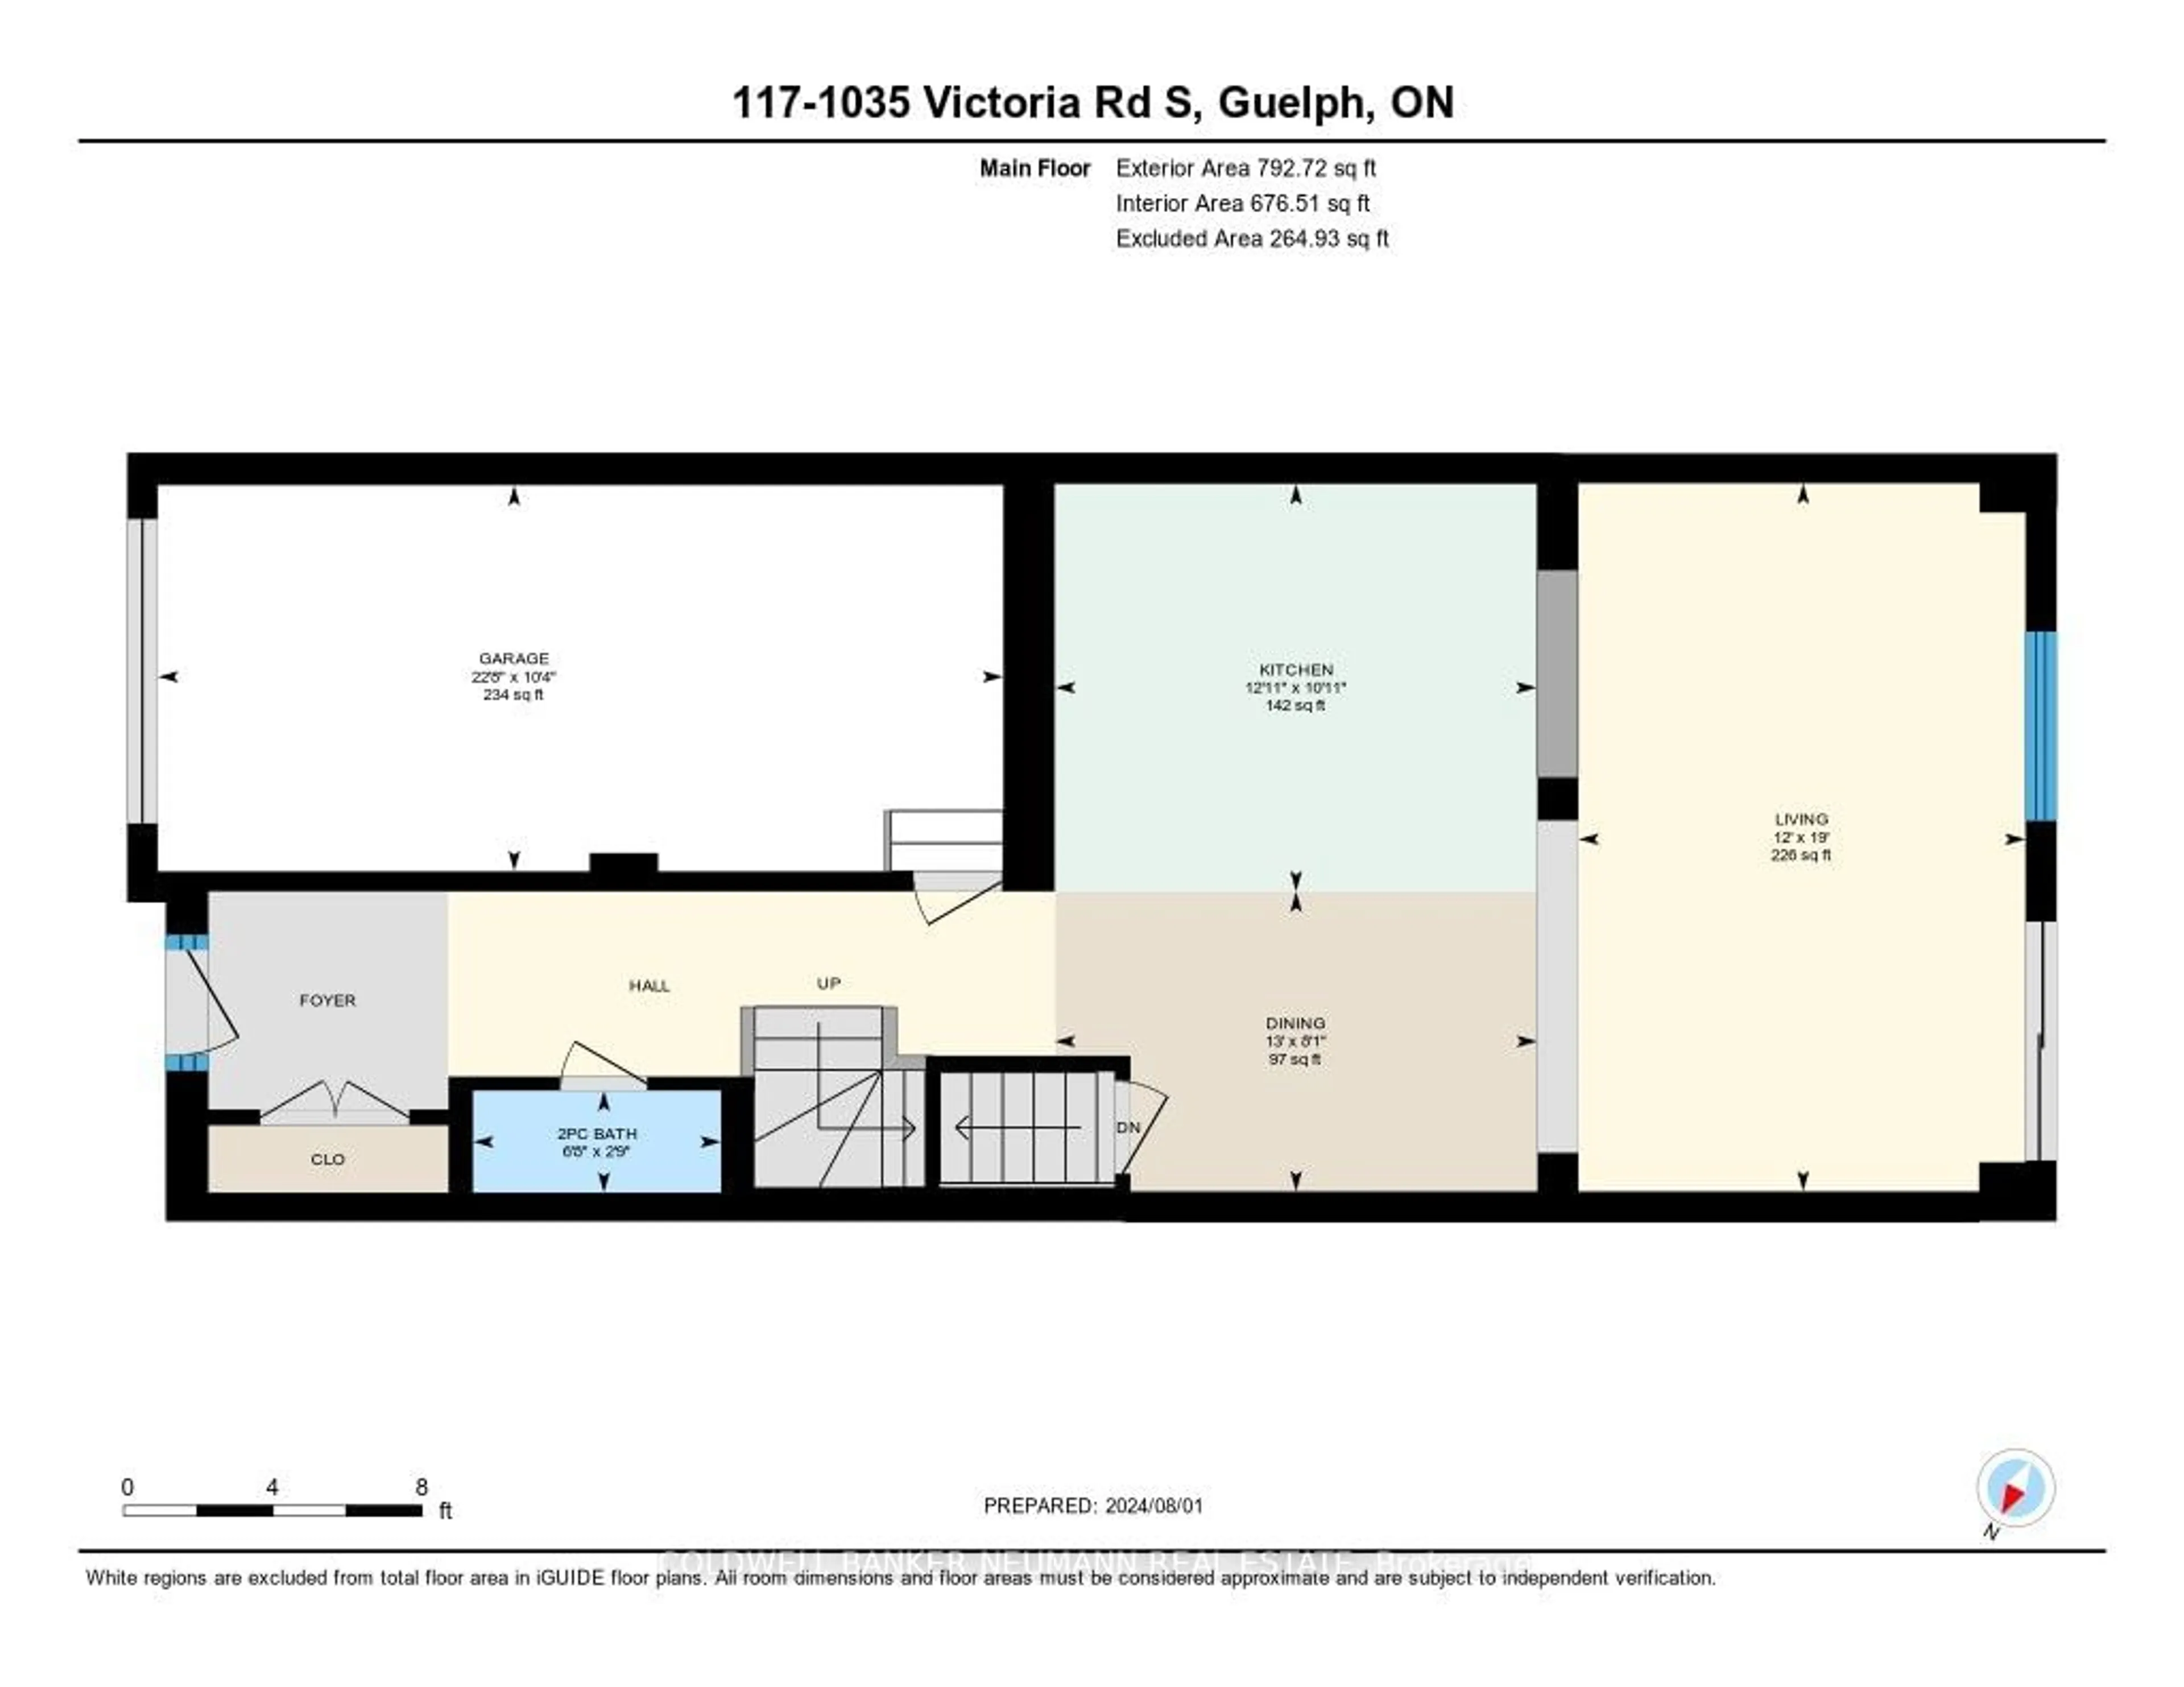 Floor plan for 1035 Victoria Rd #117, Guelph Ontario N1L 0H5